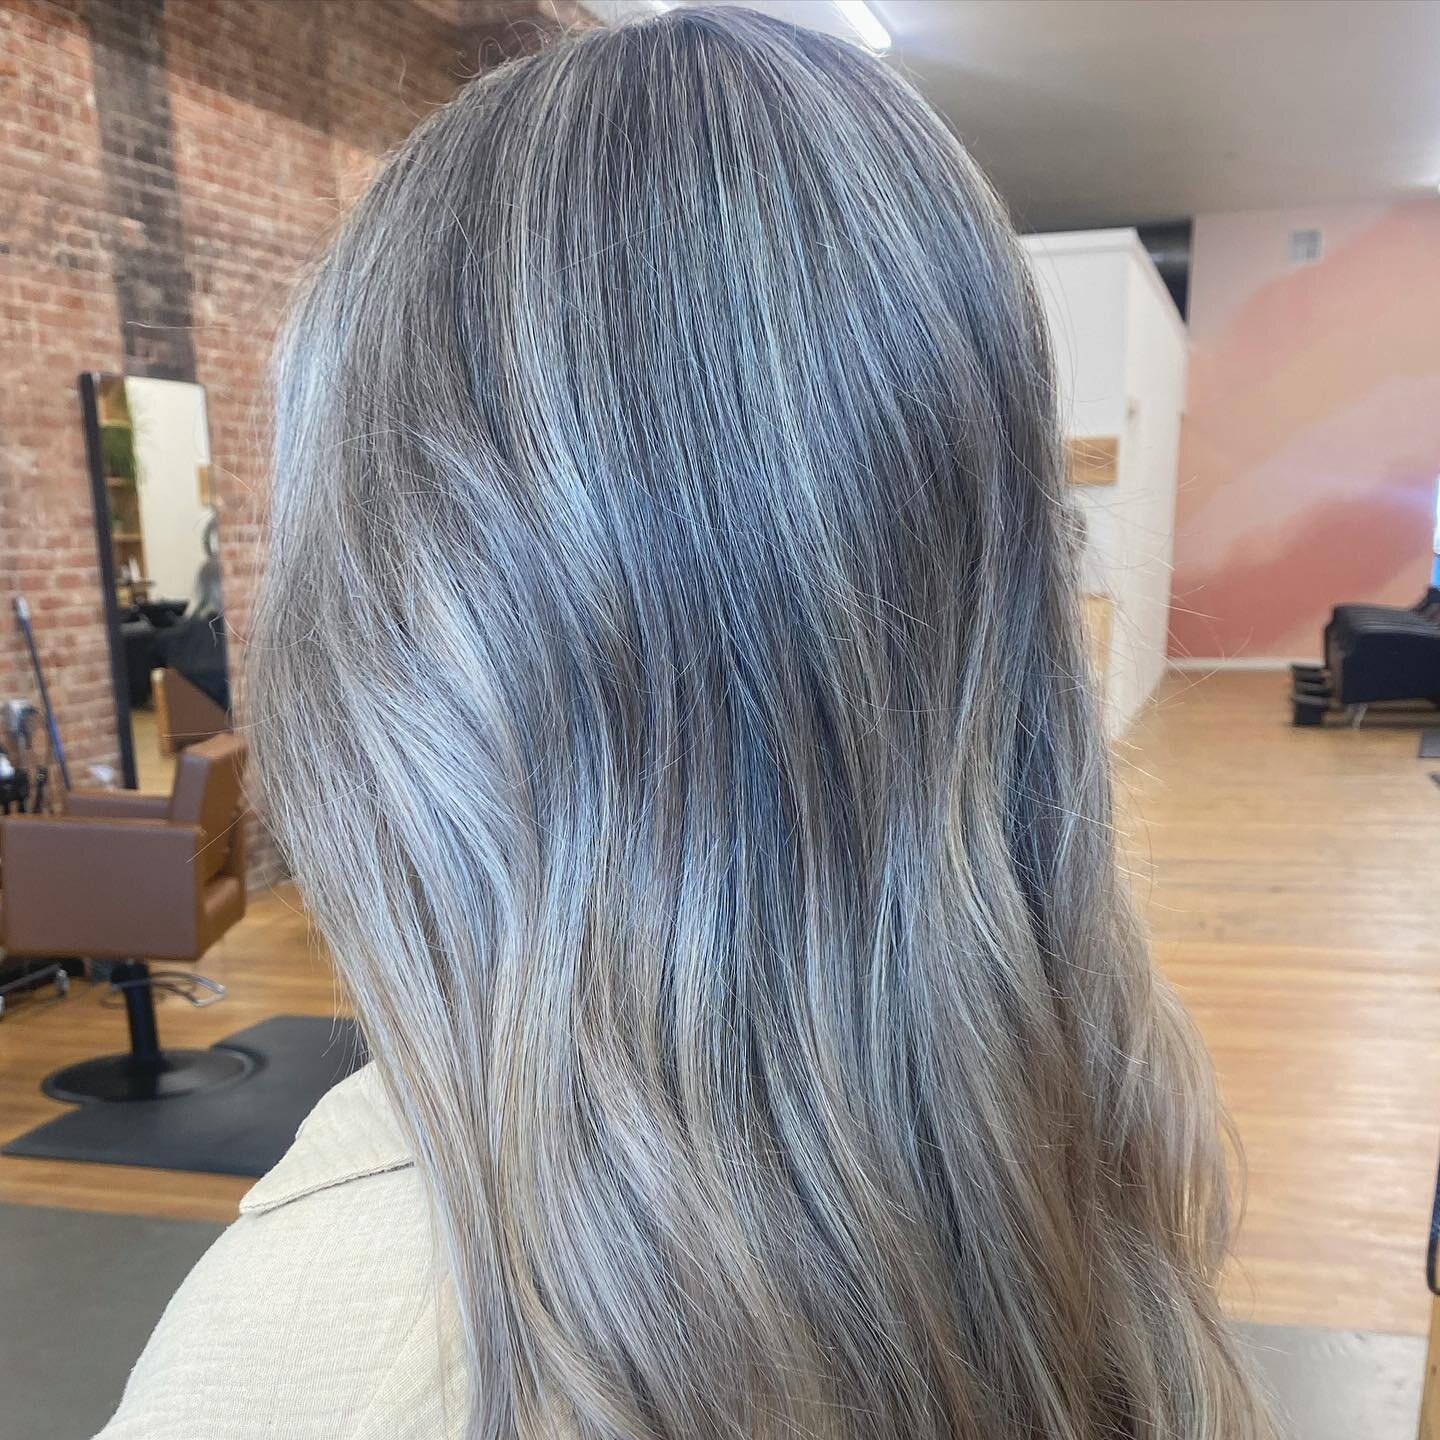 Give me all things 
bright + cheerful 💛

Tell be about your spring plans in the comments, what are you most looking forward to?

#pnwhairstylist #symmetriestudios #lyndenhairstylist #lyndenhairsalon #bellinghamhairstylist #bellinghamwashington #lynd